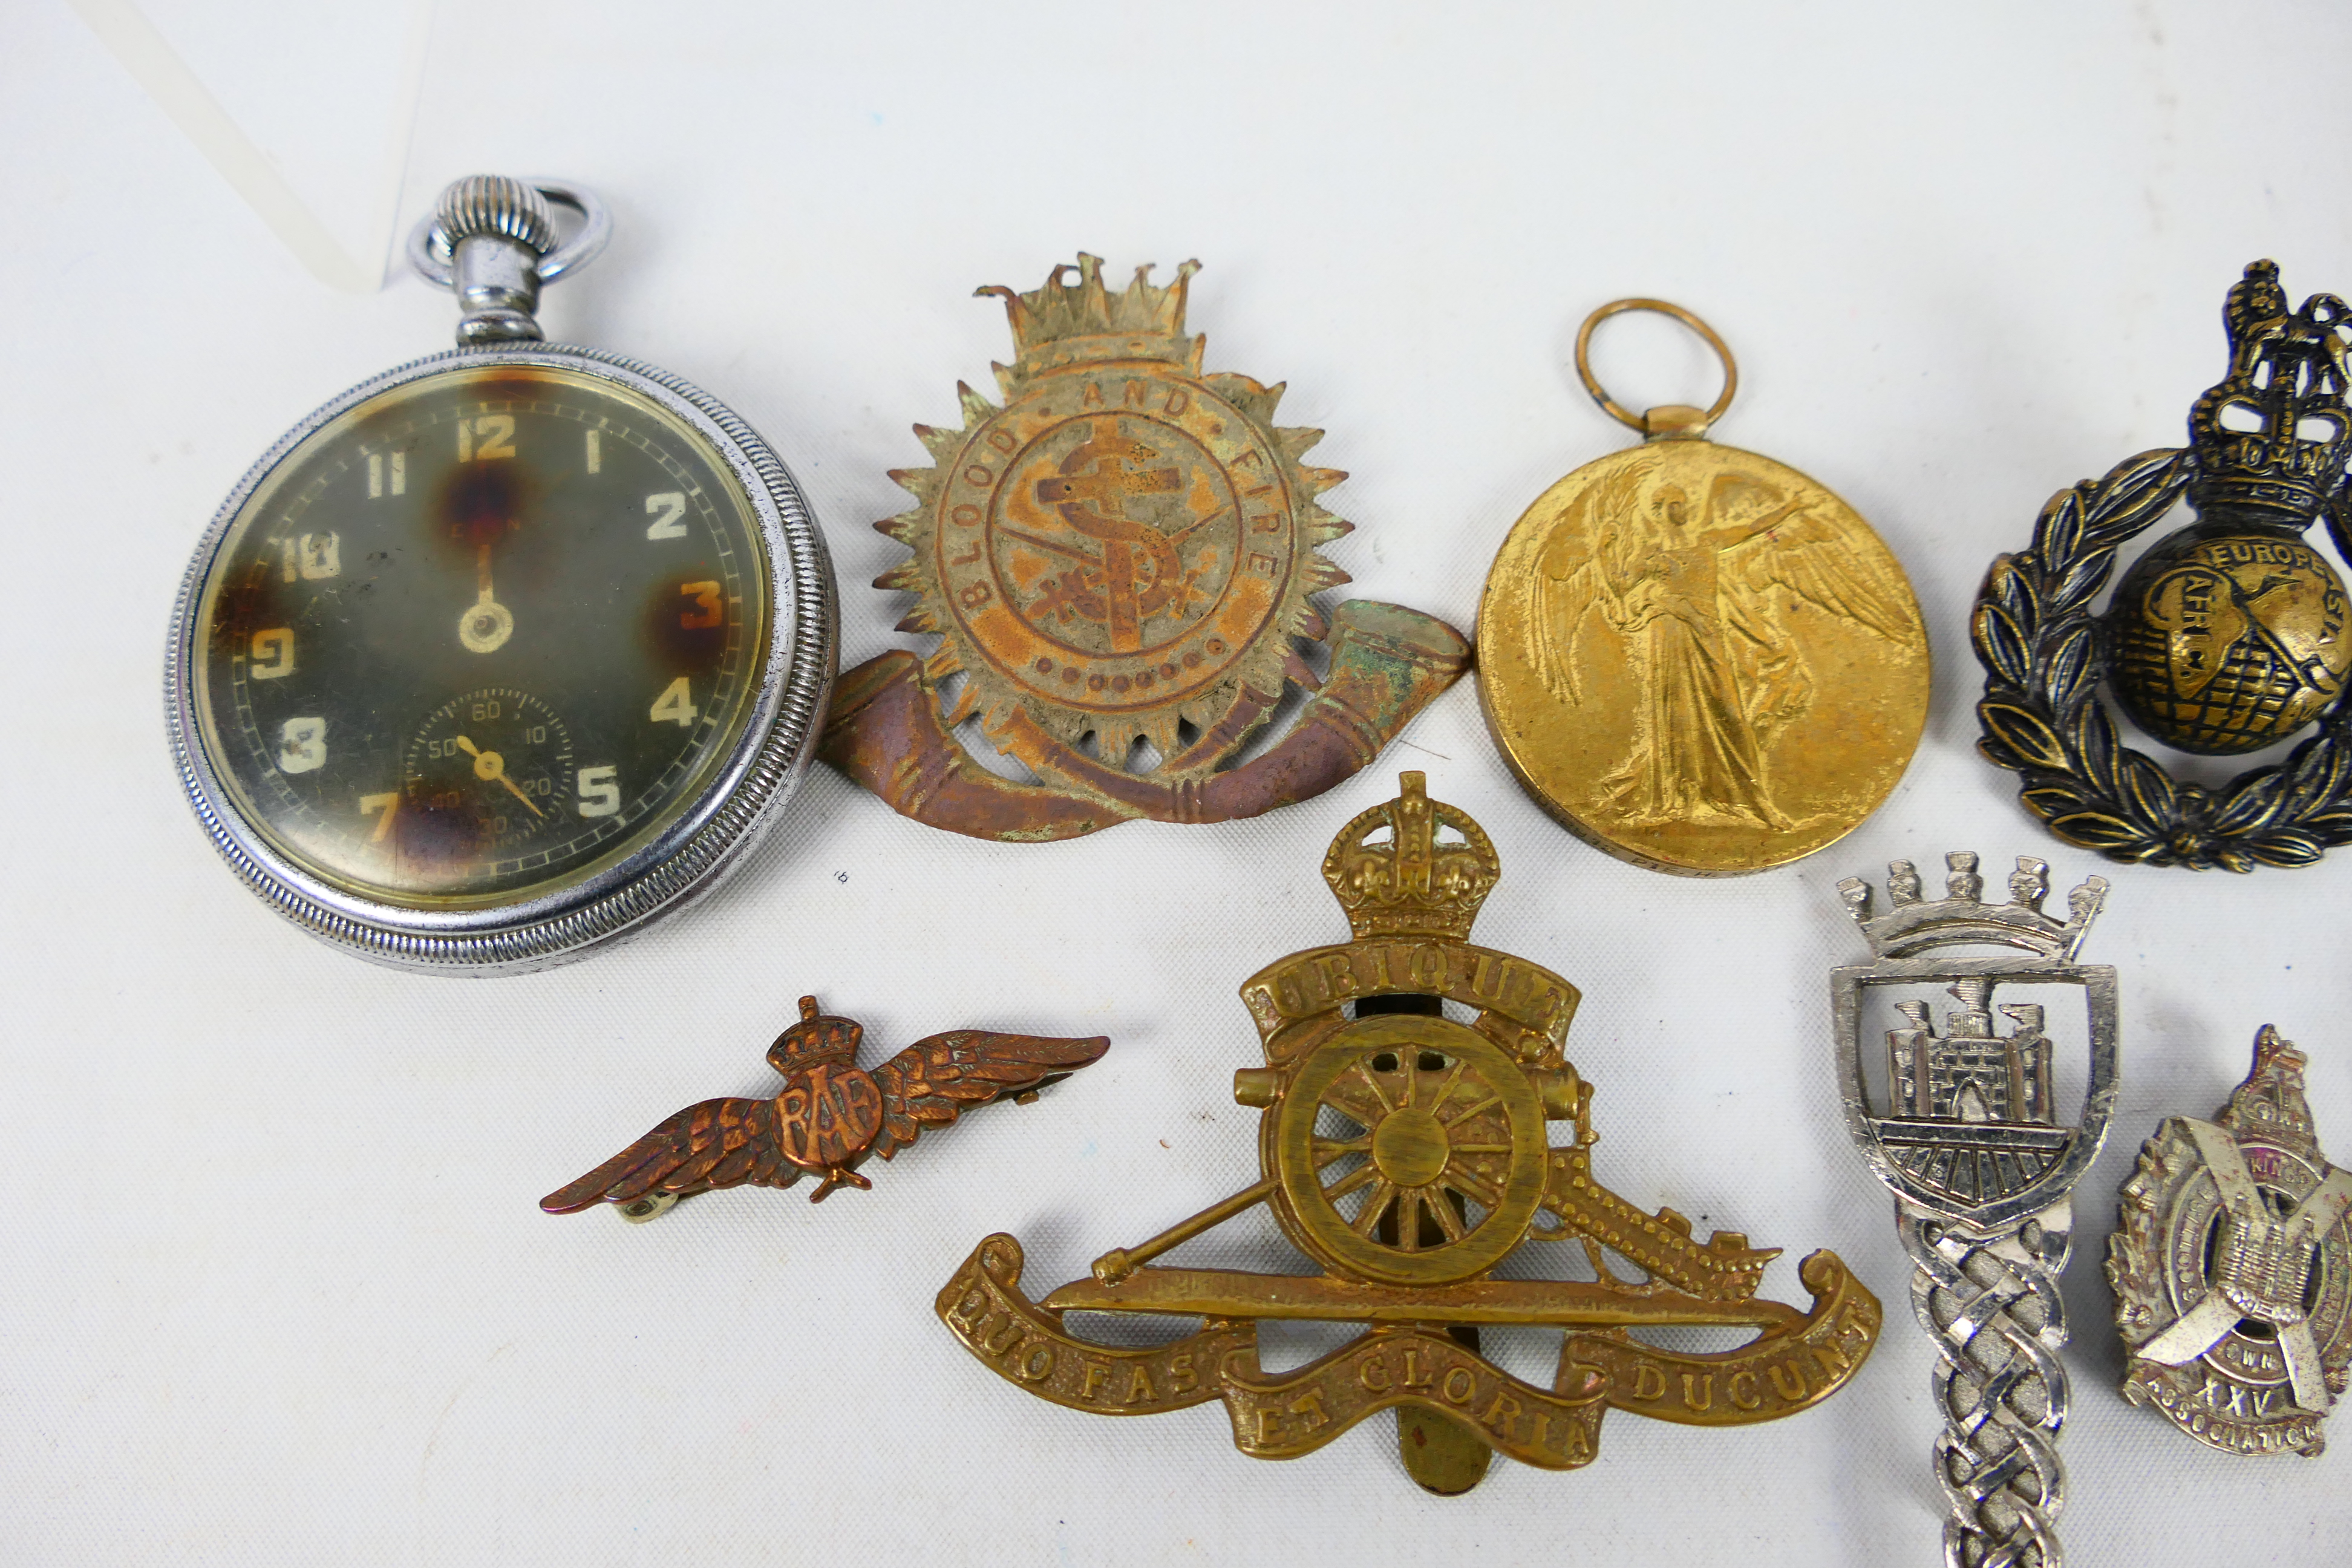 Lot to include various cap badges, General Service Trade Pattern pocket watch, - Image 5 of 11